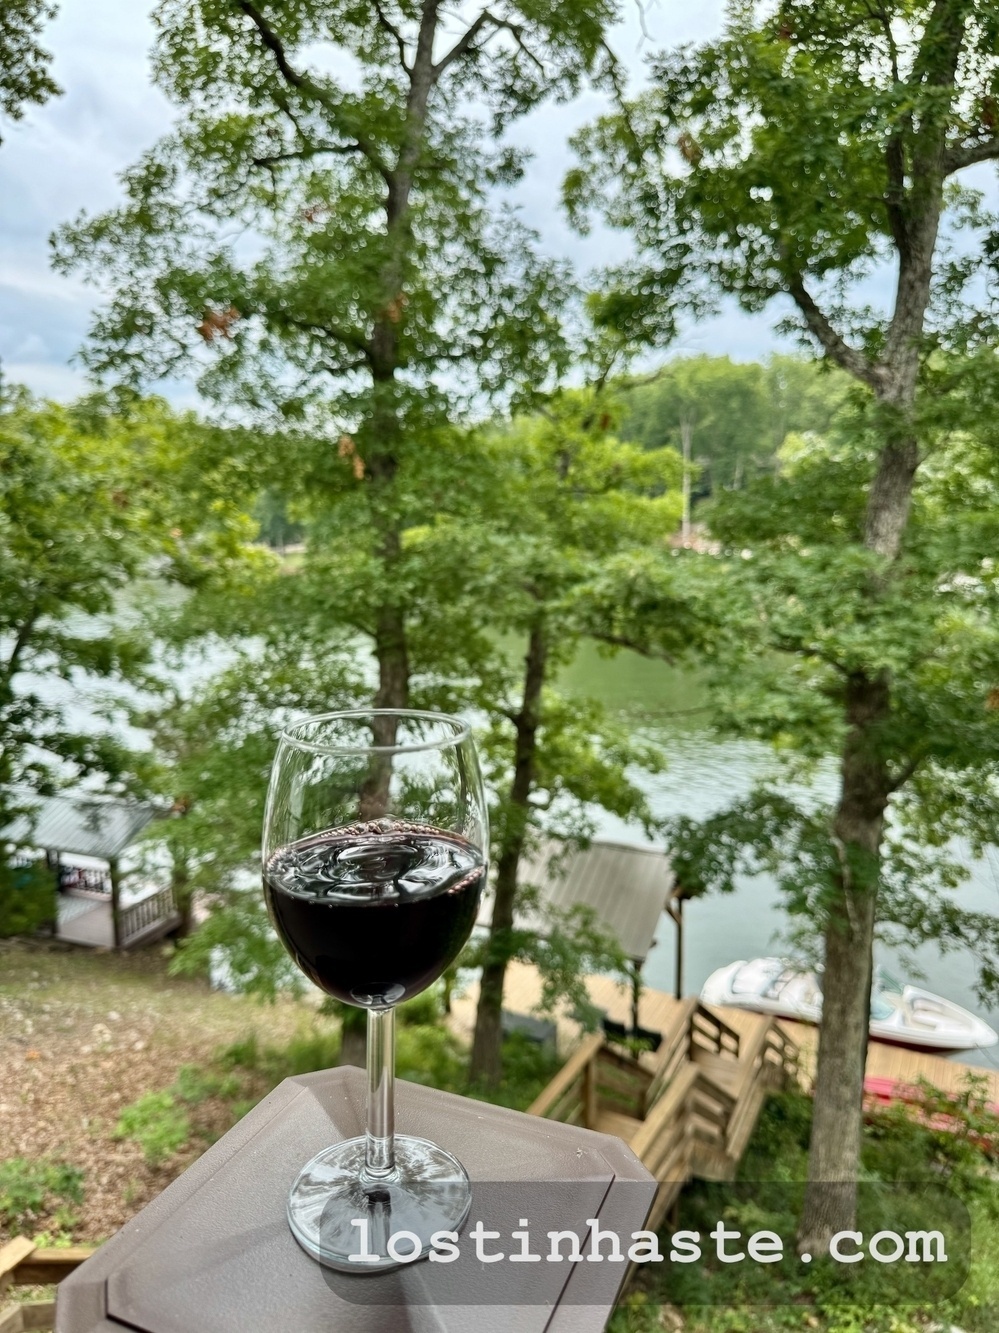 A glass of red wine sits on a wooden surface, with blurred green trees and a lake in the background.